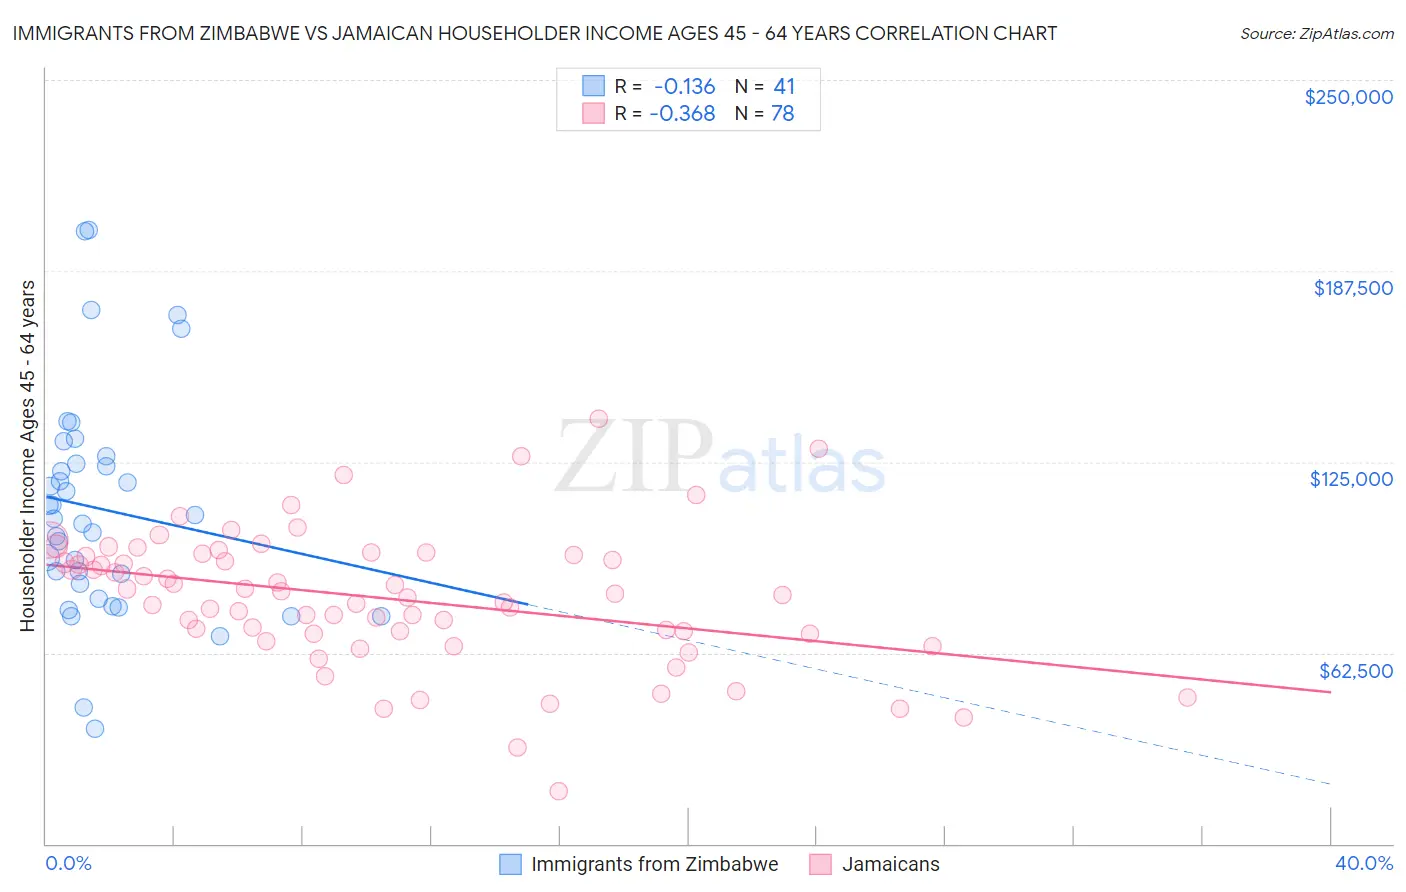 Immigrants from Zimbabwe vs Jamaican Householder Income Ages 45 - 64 years